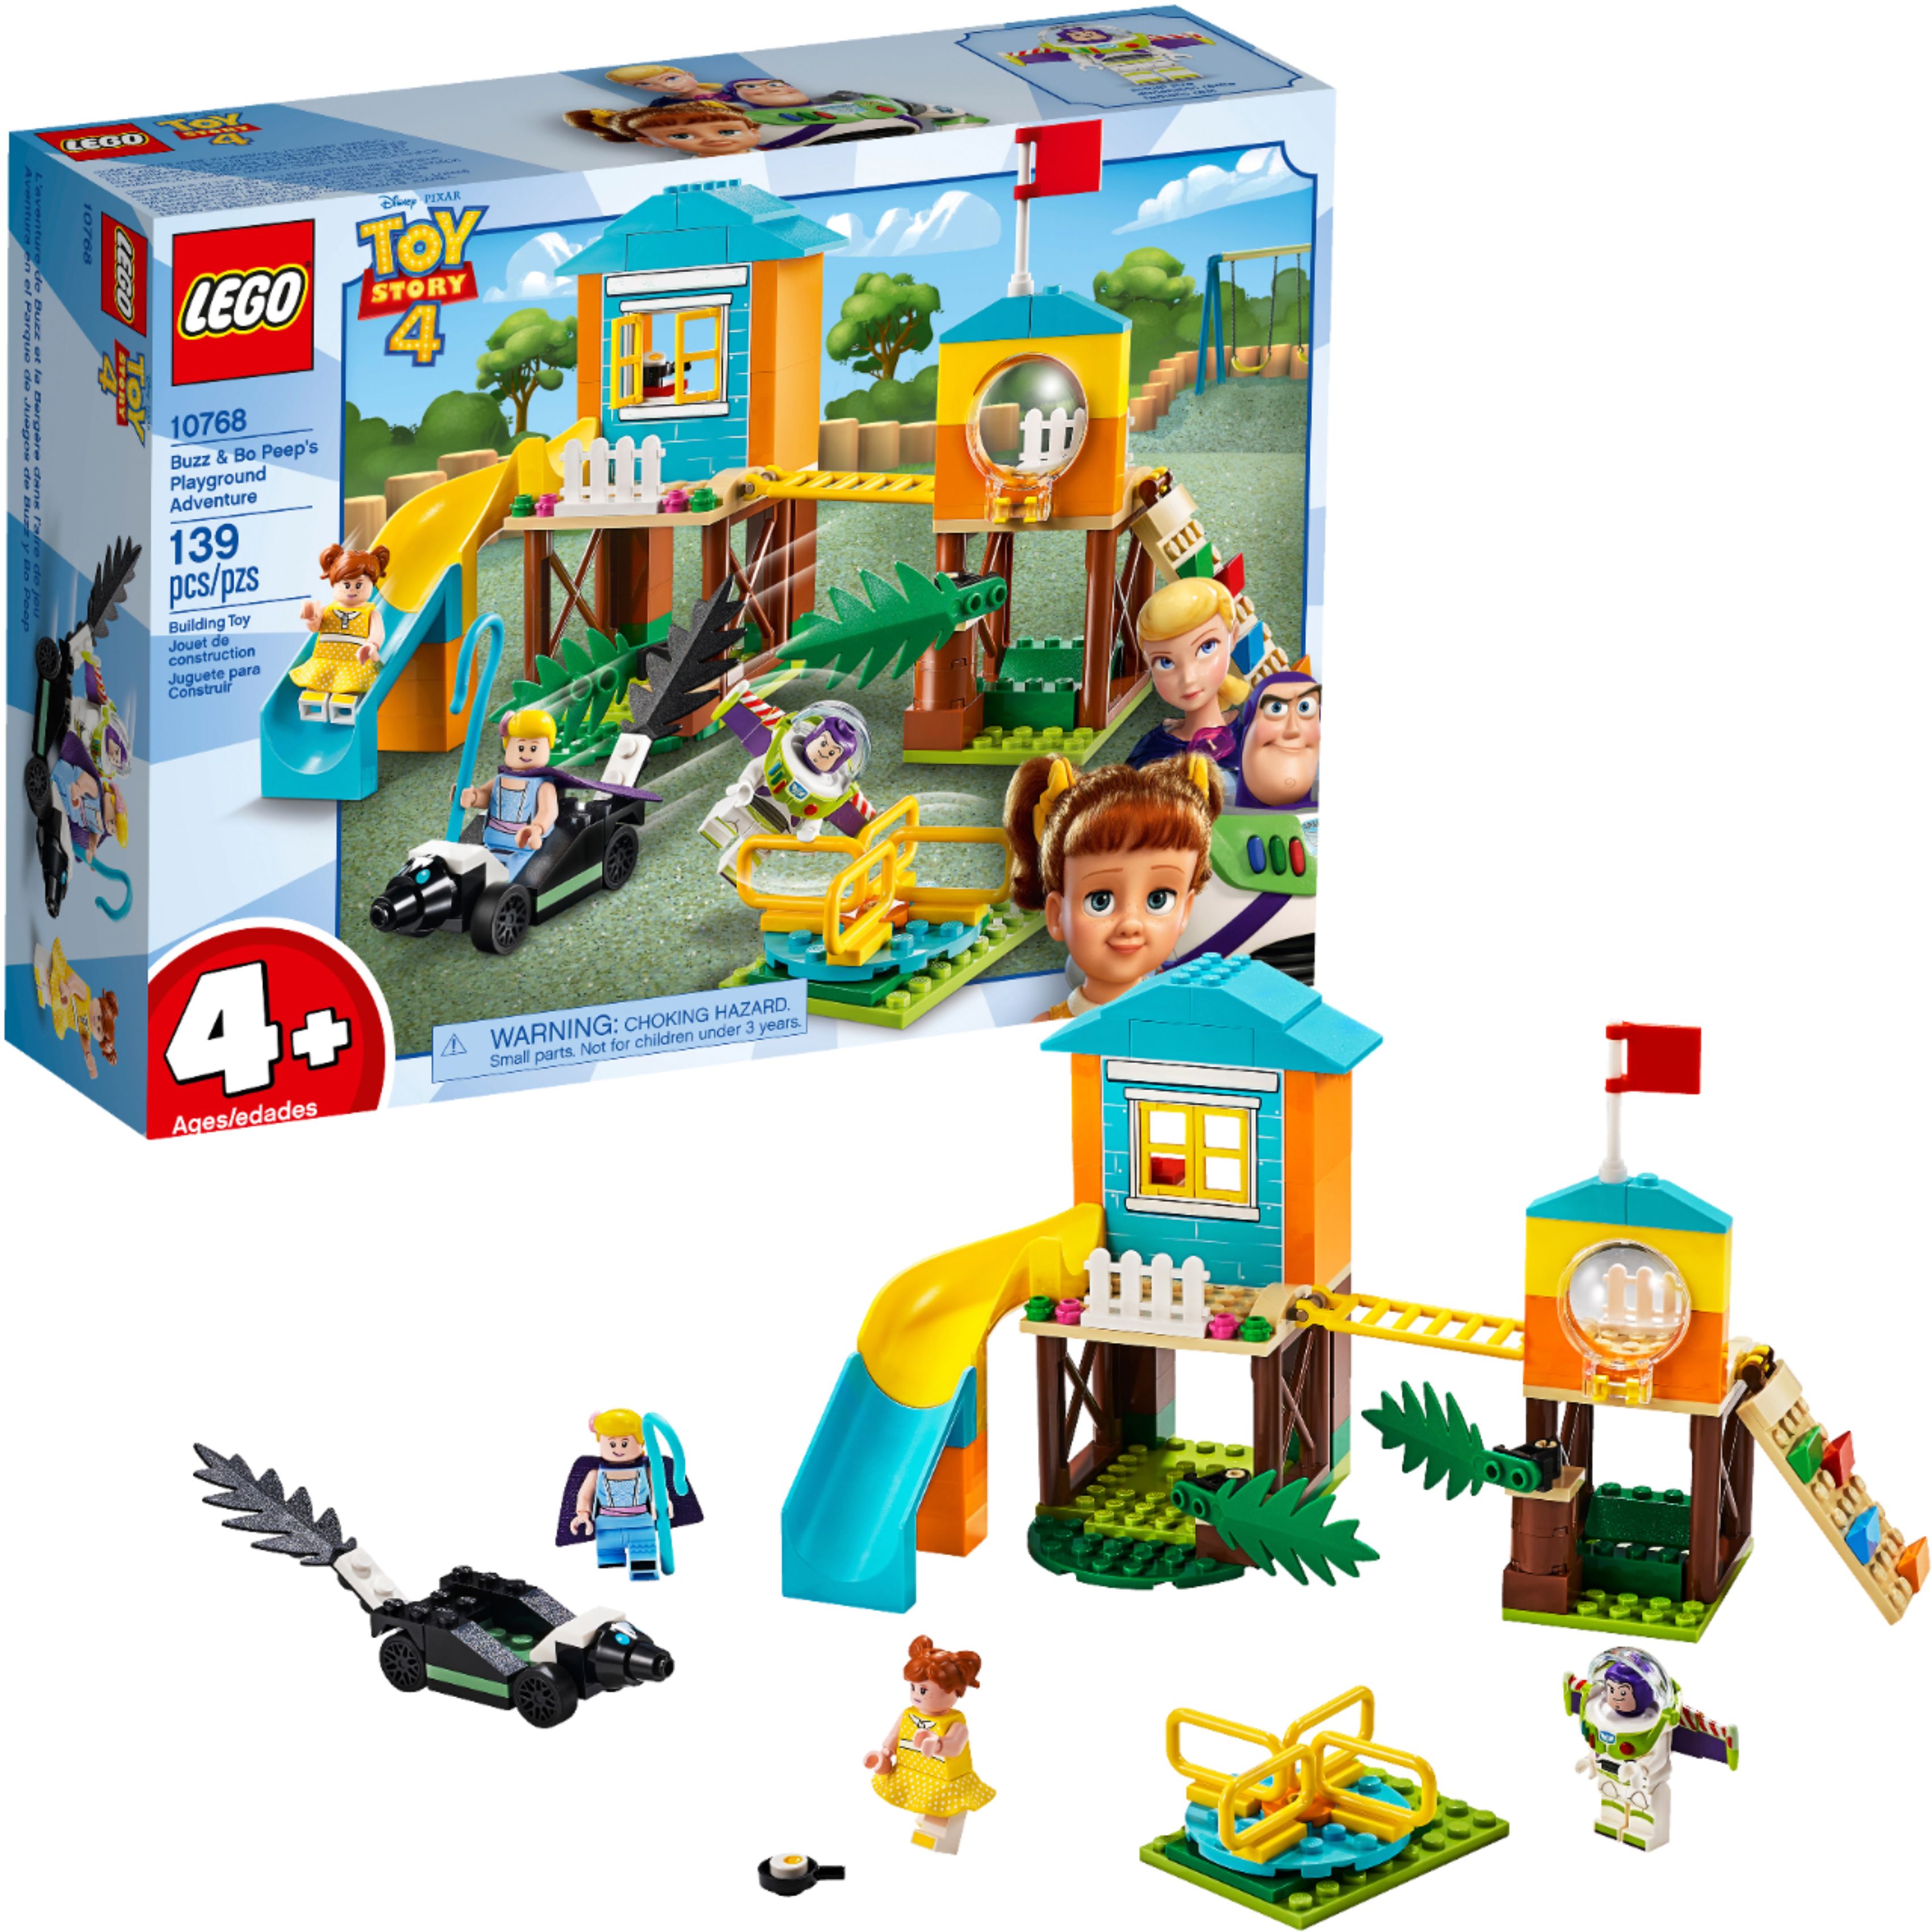 All Lego Toy Story Sets | lupon.gov.ph